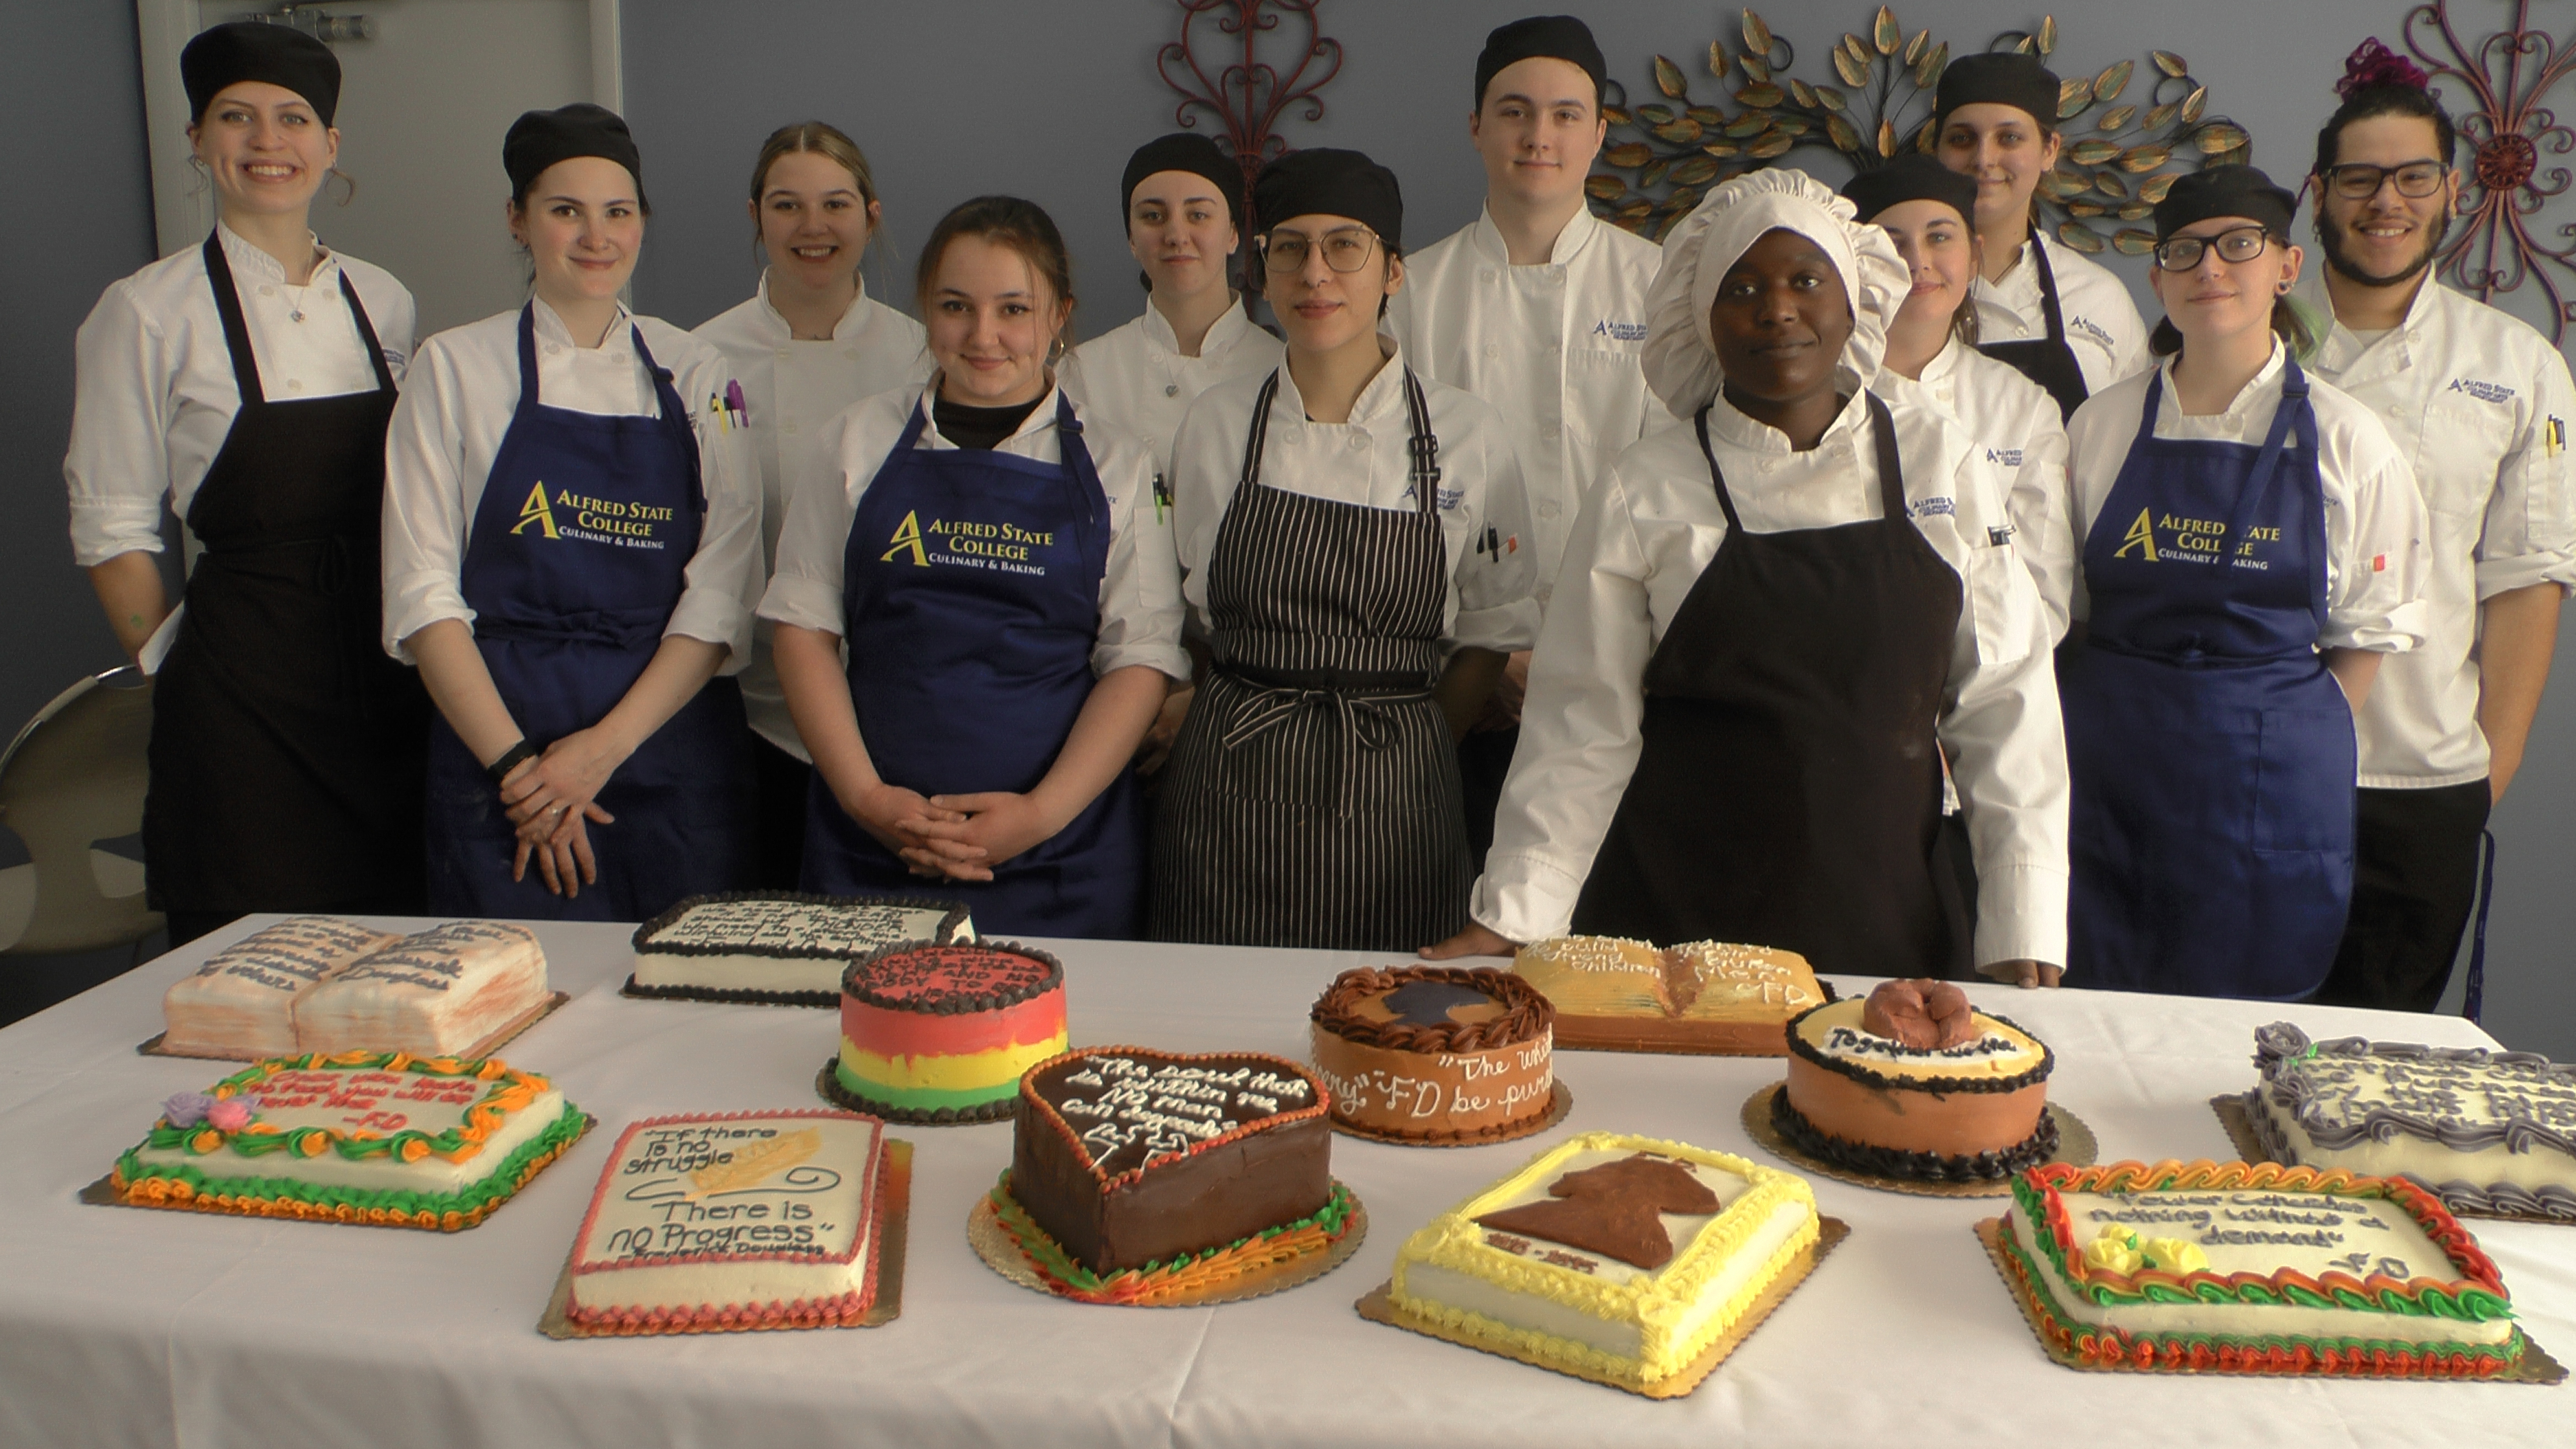 Alfred State Culinary Arts Baking students show off their cakes made for the Douglass Day bake-off